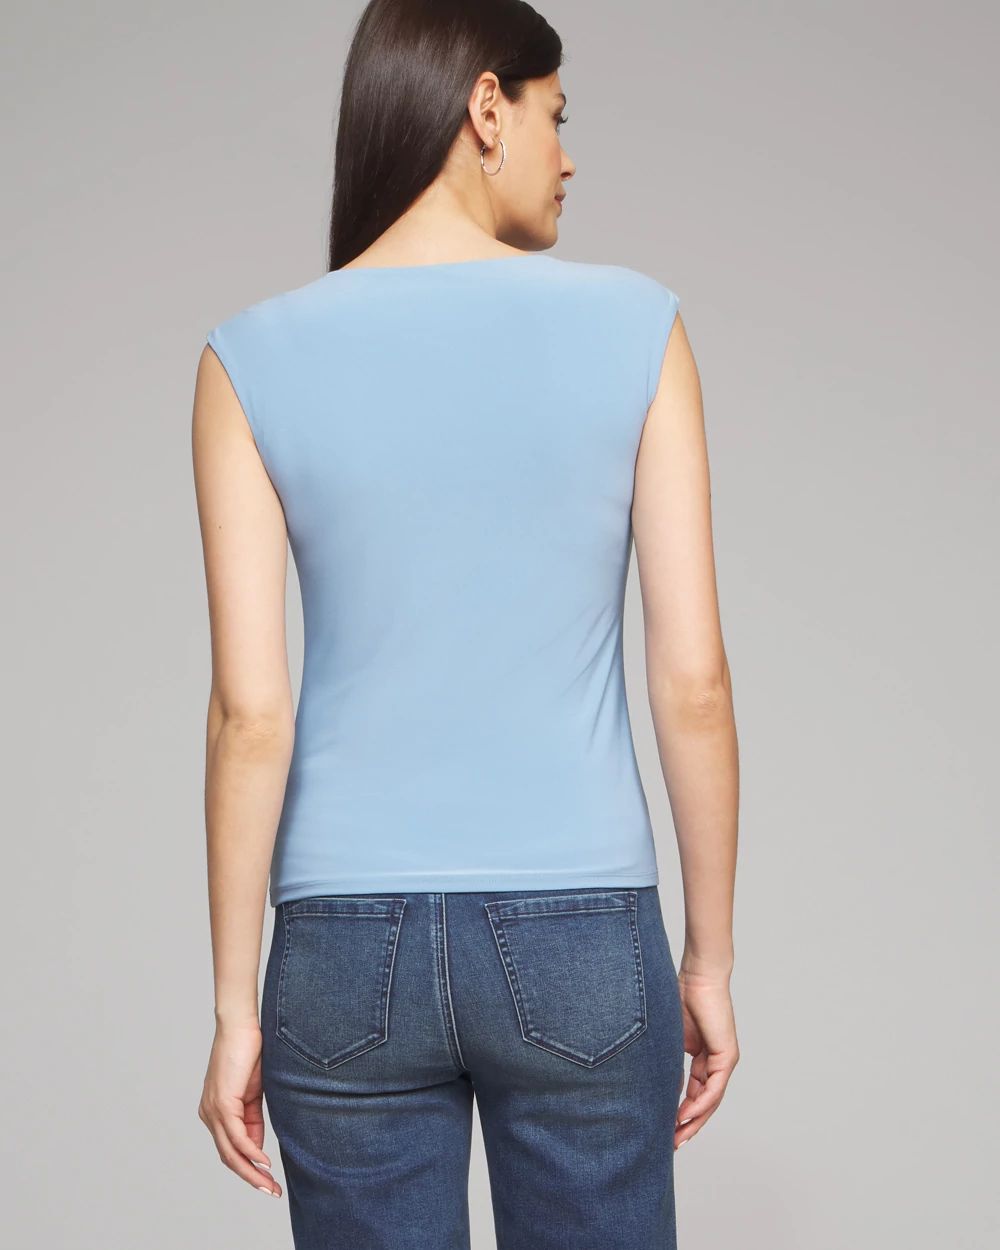 Outlet WHBM Cap Sleeve Scoop Neck Top click to view larger image.